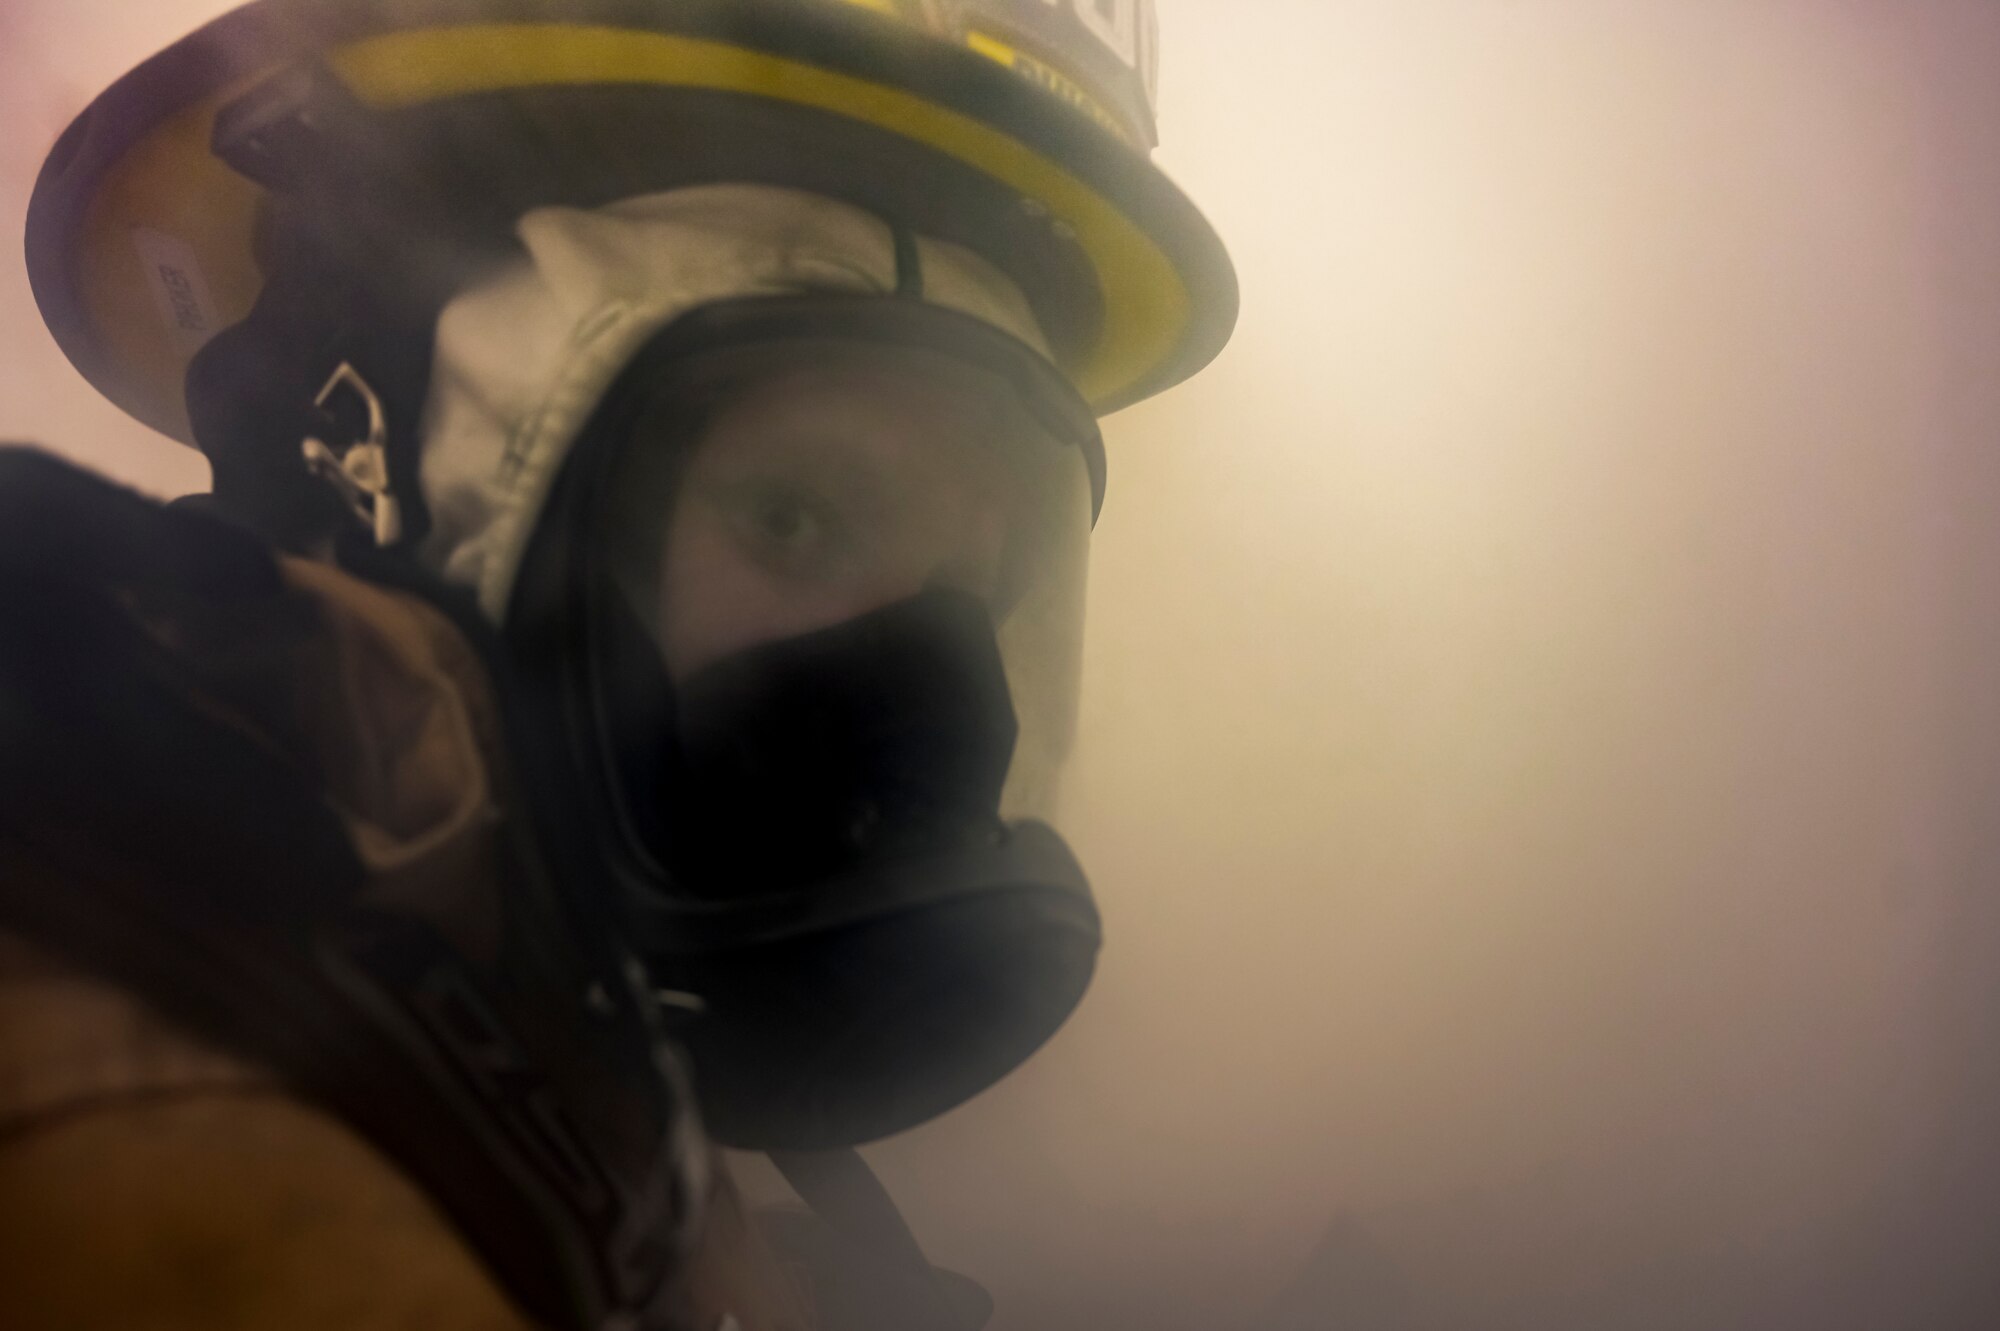 Alexis Pihoker, Pittsburgh Airport Authority firefighter, walks through a smoke-filled room searching for people in need of rescue during a munitions storage area fire drill at the Pittsburgh International Airport Air Reserve Station, Pennsylvania, Dec. 10, 2020.